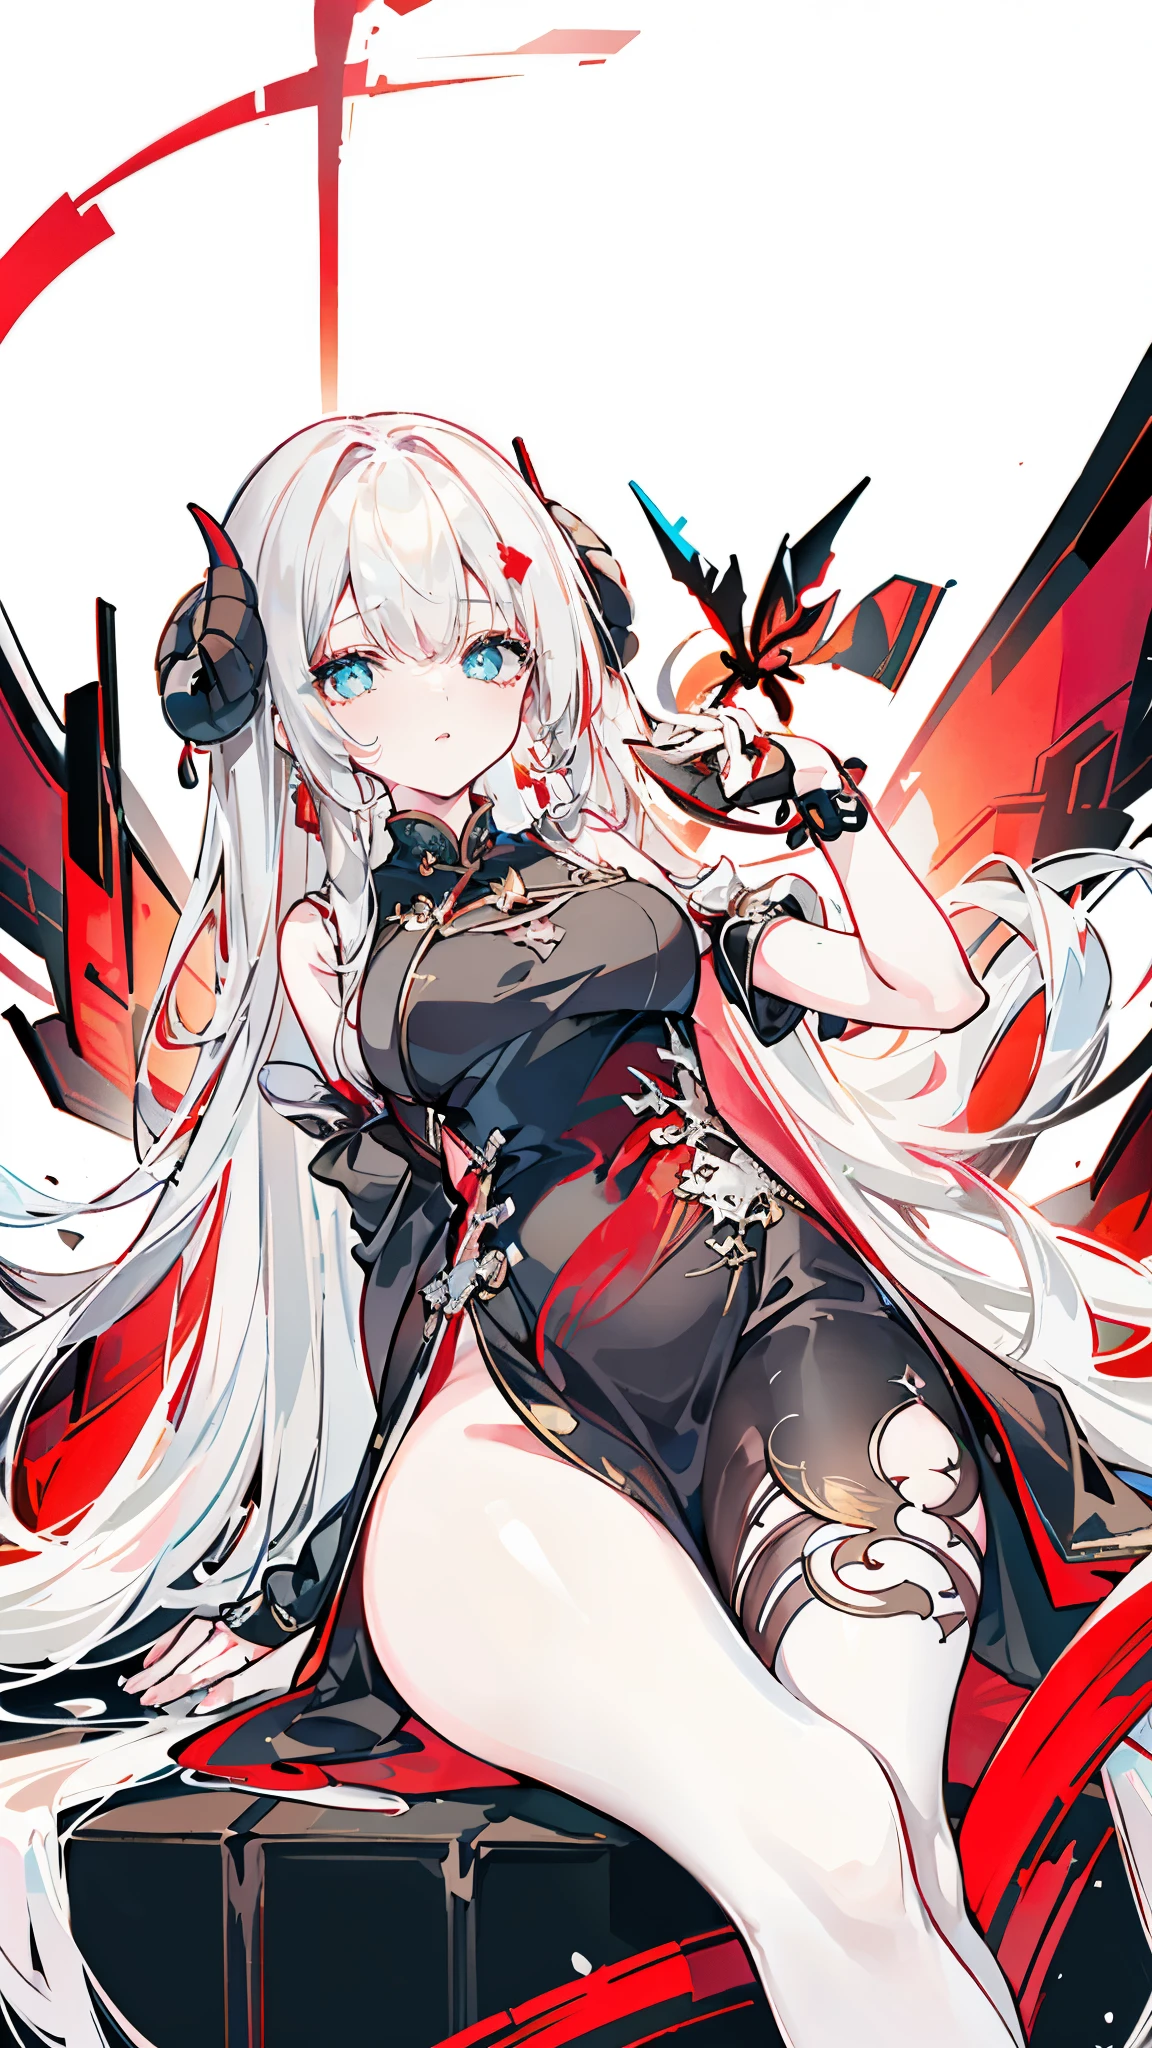 a girl，Sheep&#39;s horn, full color,  long white hair, Red eyes ，Eyeliner,  black transparent clothes, Red, open air, Rose, night, ruins, Butterfly，mine same as the original, mine, , (:1.2)
rest, (cheongsam), (view from below), (Put your arms behind your back), (wild lift), thin dress, Crotch cutout, best quality, high resolution, unified 8k wallpaper, (illustration:0.8), (Beautiful and delicate eyes:1.6), extremely detailed face, perfect lighting, Very detailed cg, (perfect hands, perfect anatomy),soles of feet，sitting，blond，red lips，Acting cuegs close-up